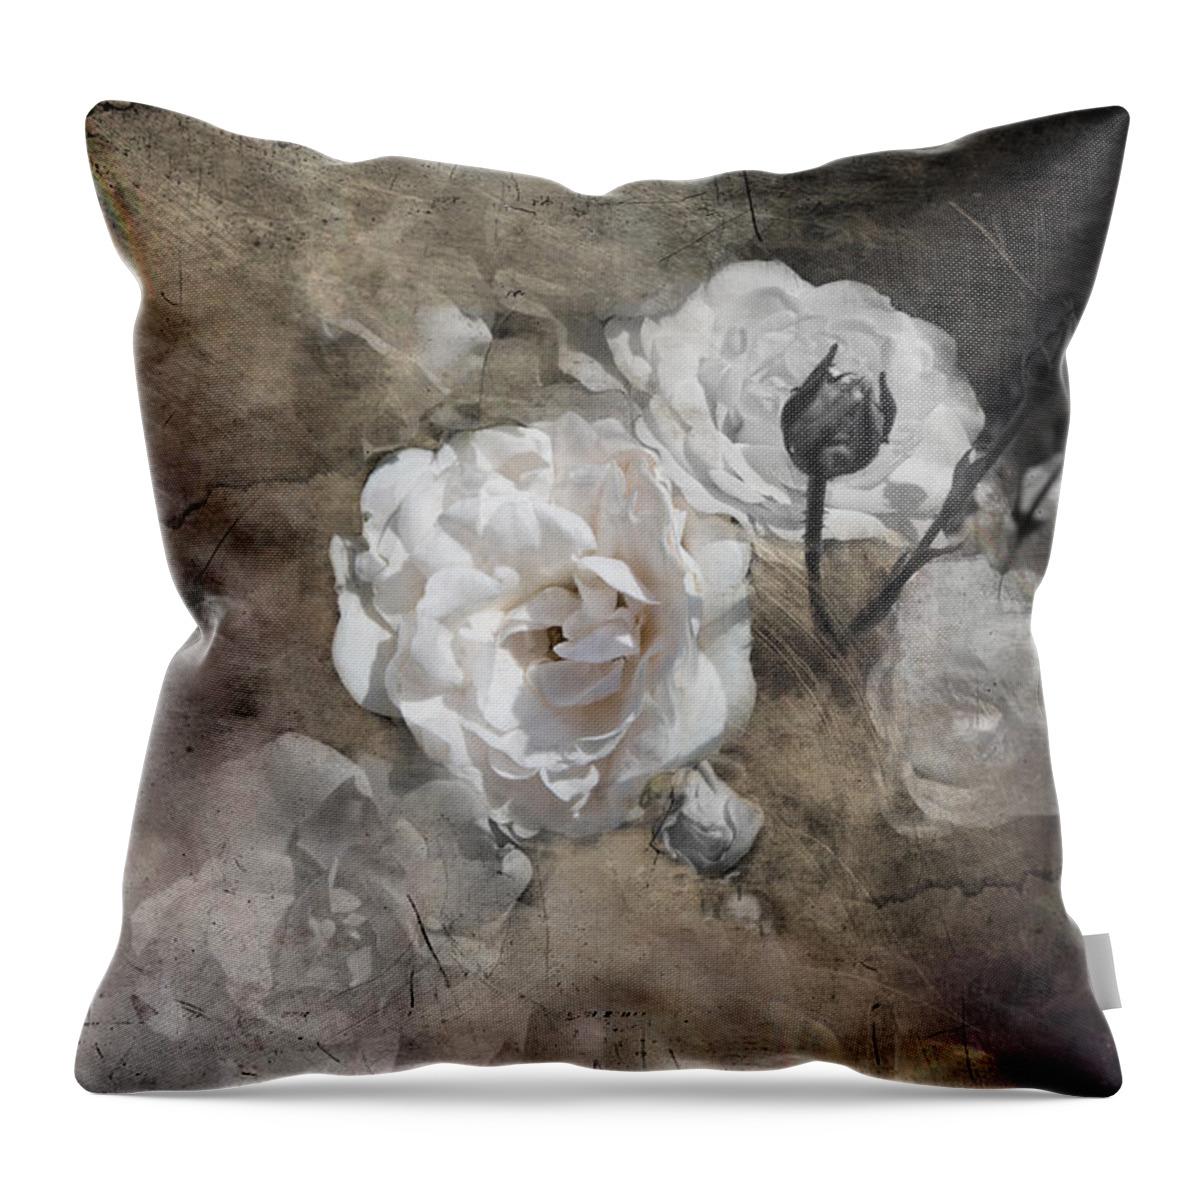 Flower Throw Pillow featuring the photograph Grunge White Rose by Evie Carrier